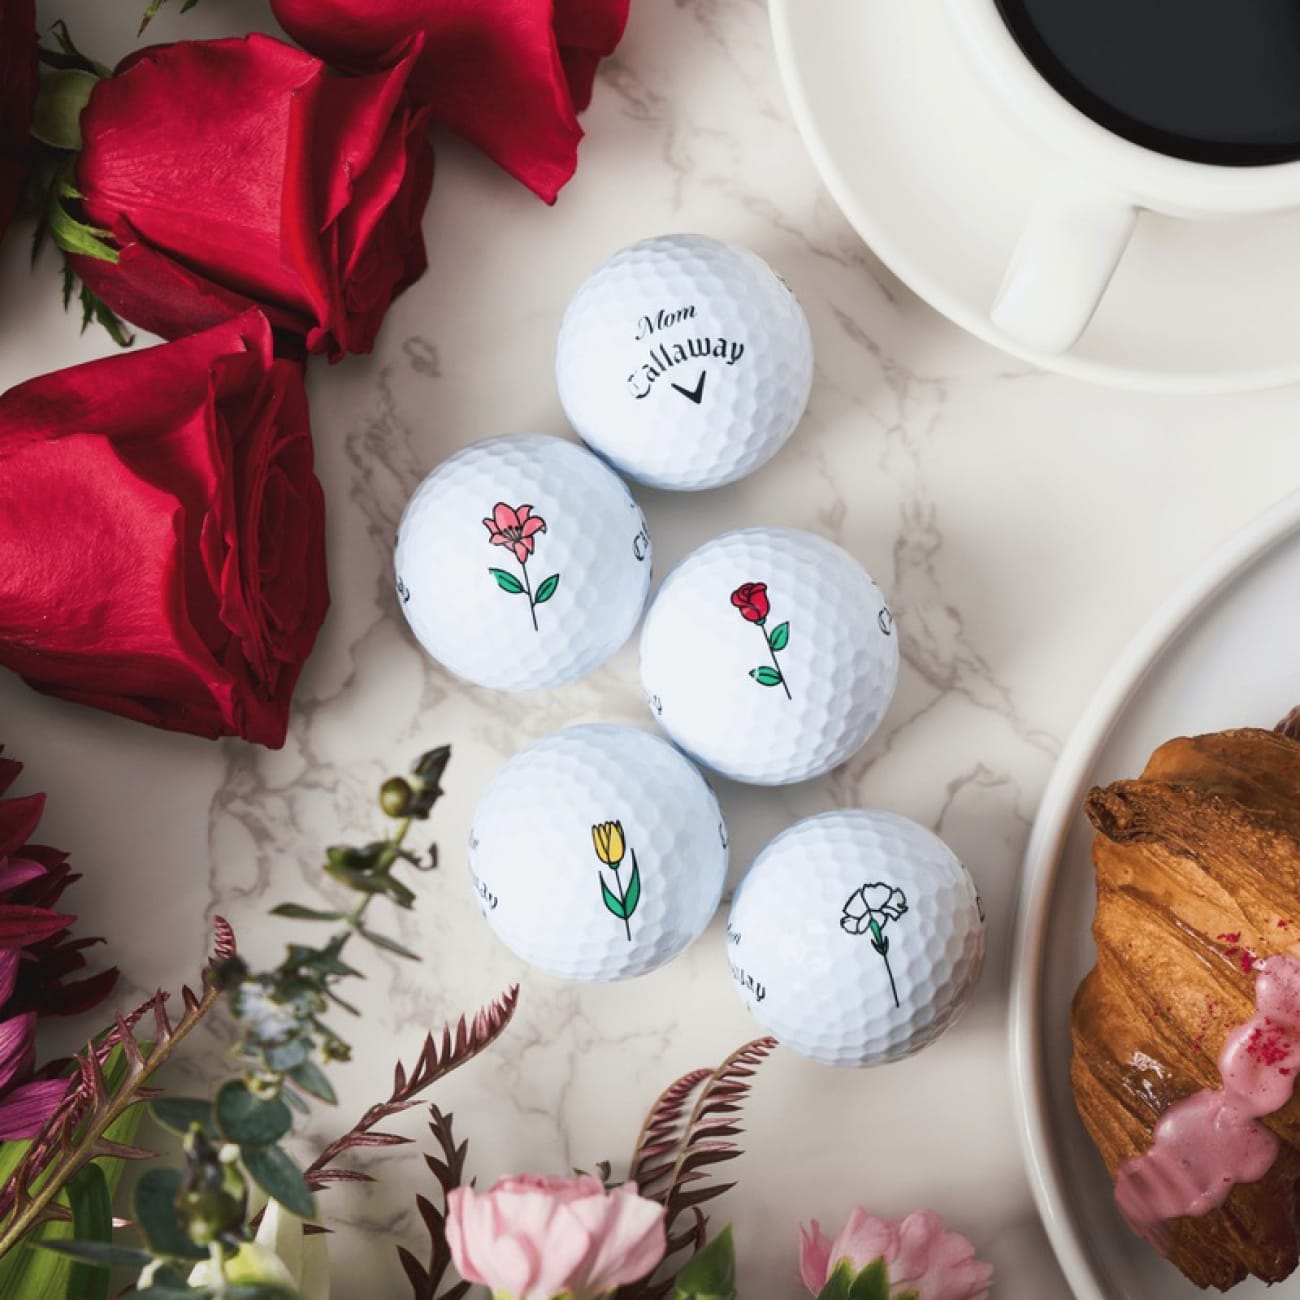 Mother’s Day Golf Gift Guide: Great Deals on Gear For Moms Who Love to Play Golf